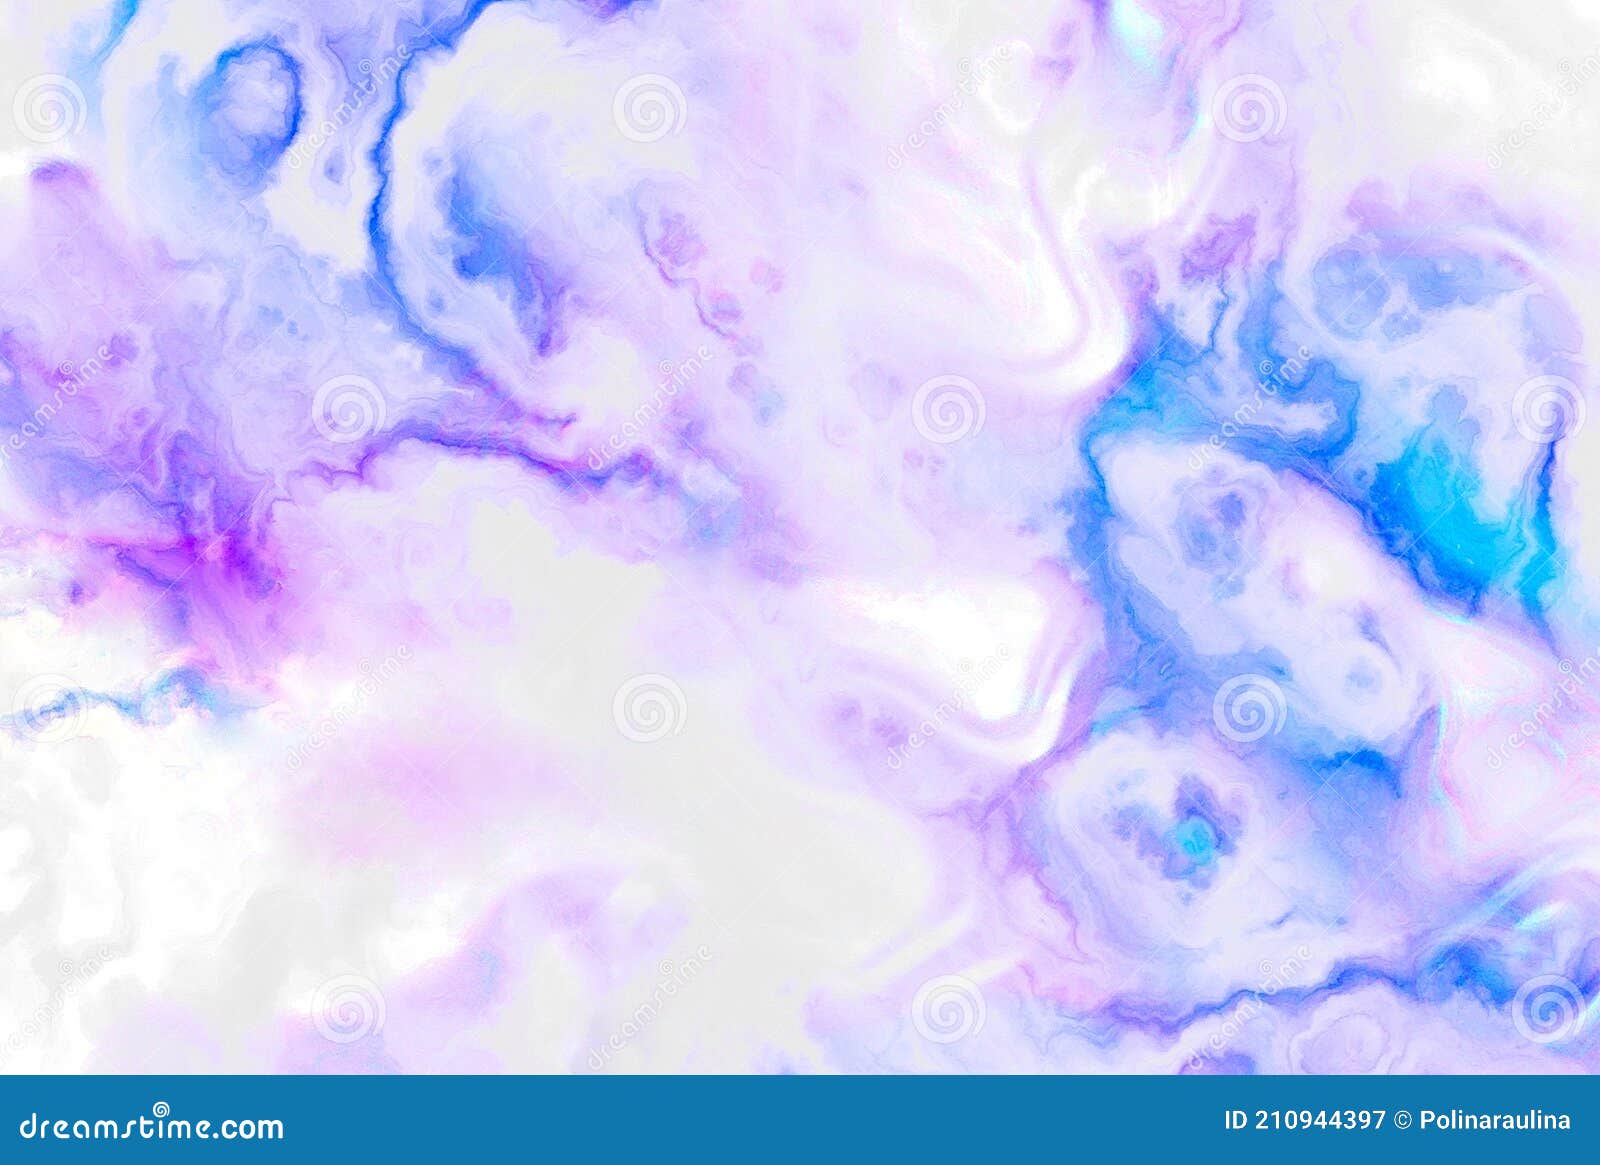 Alcohol Ink Abstract Luxury Background.Digital Watercolor Fluid 